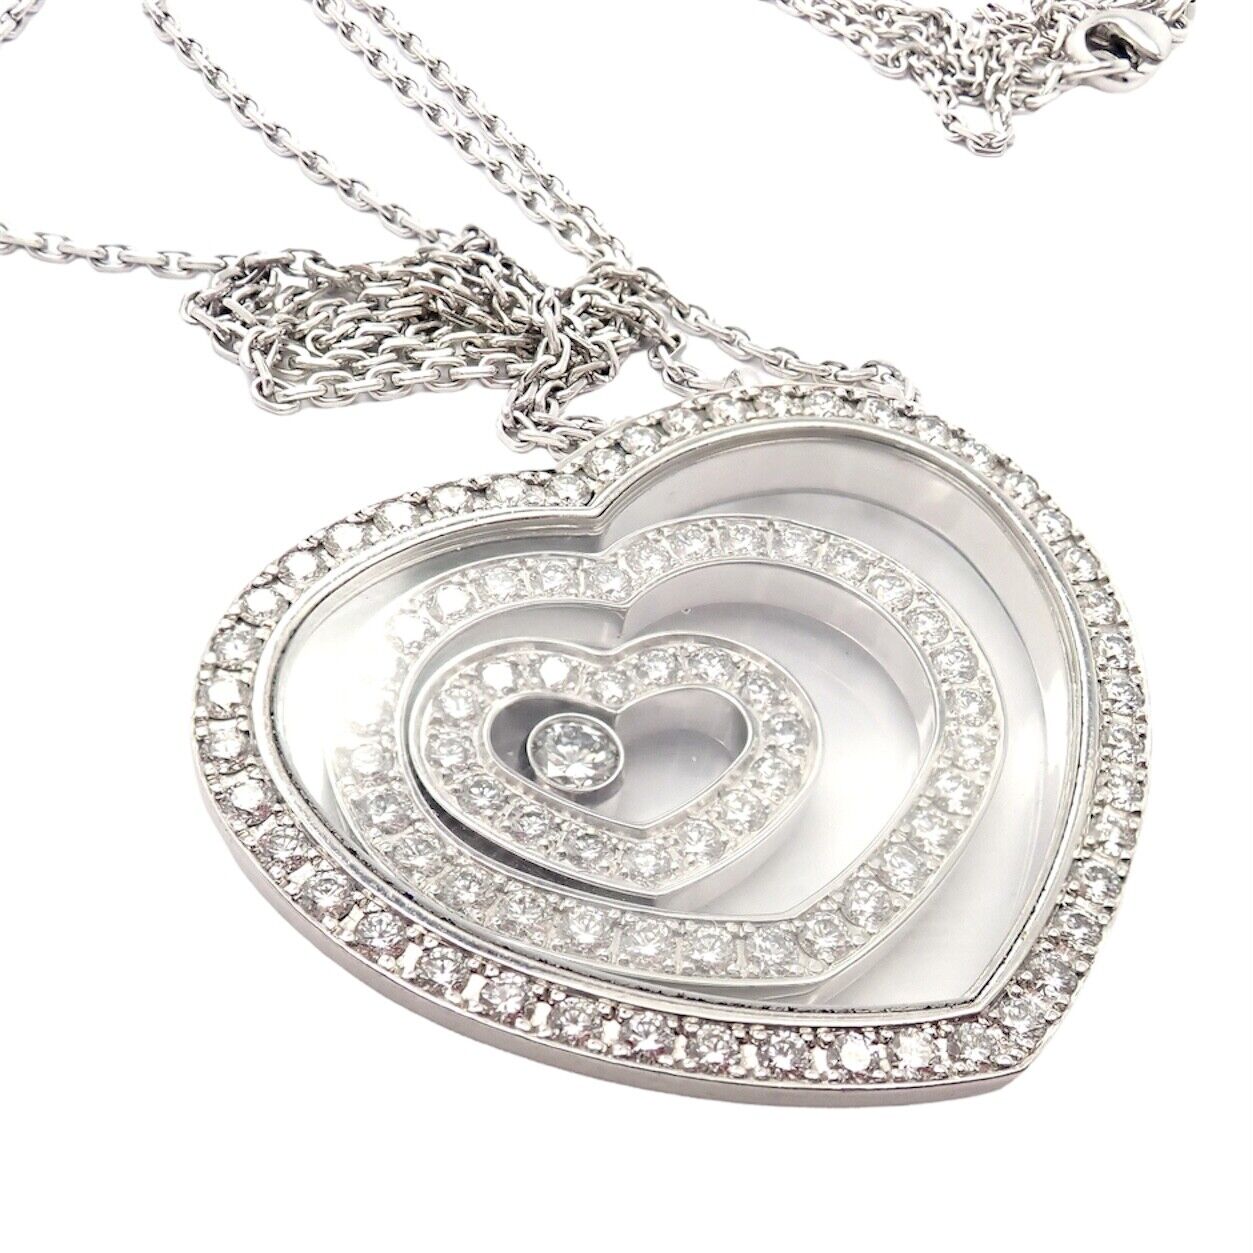 Chopard Jewelry & Watches:Fine Jewelry:Necklaces & Pendants Authentic! Chopard 18k White Gold Large Happy Spirit Heart Diamond Necklace